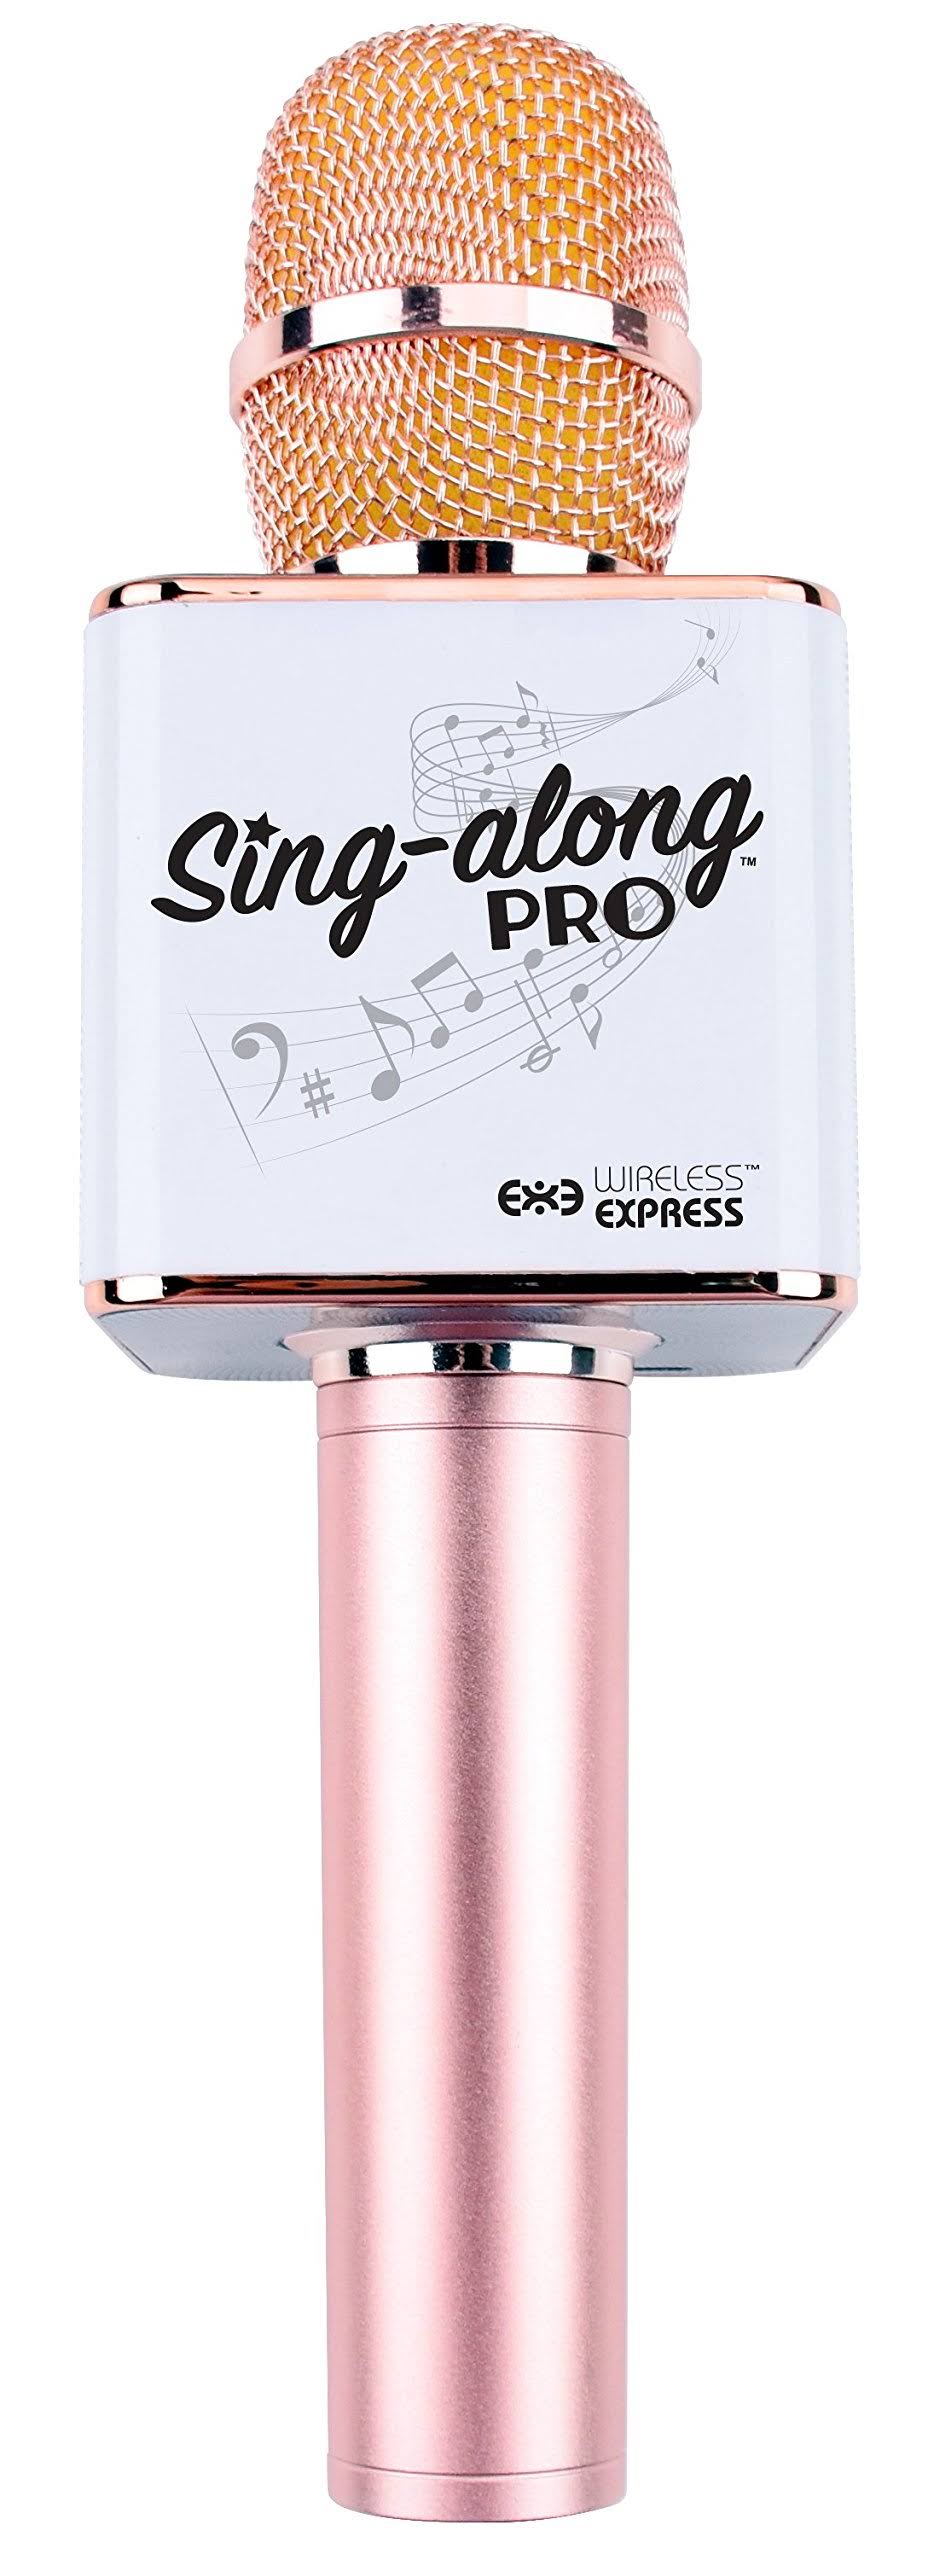 Sing-along Pro Bluetooth Karaoke - Microphone and Bluetooth Stereo Speaker All-in-one, Rose Gold